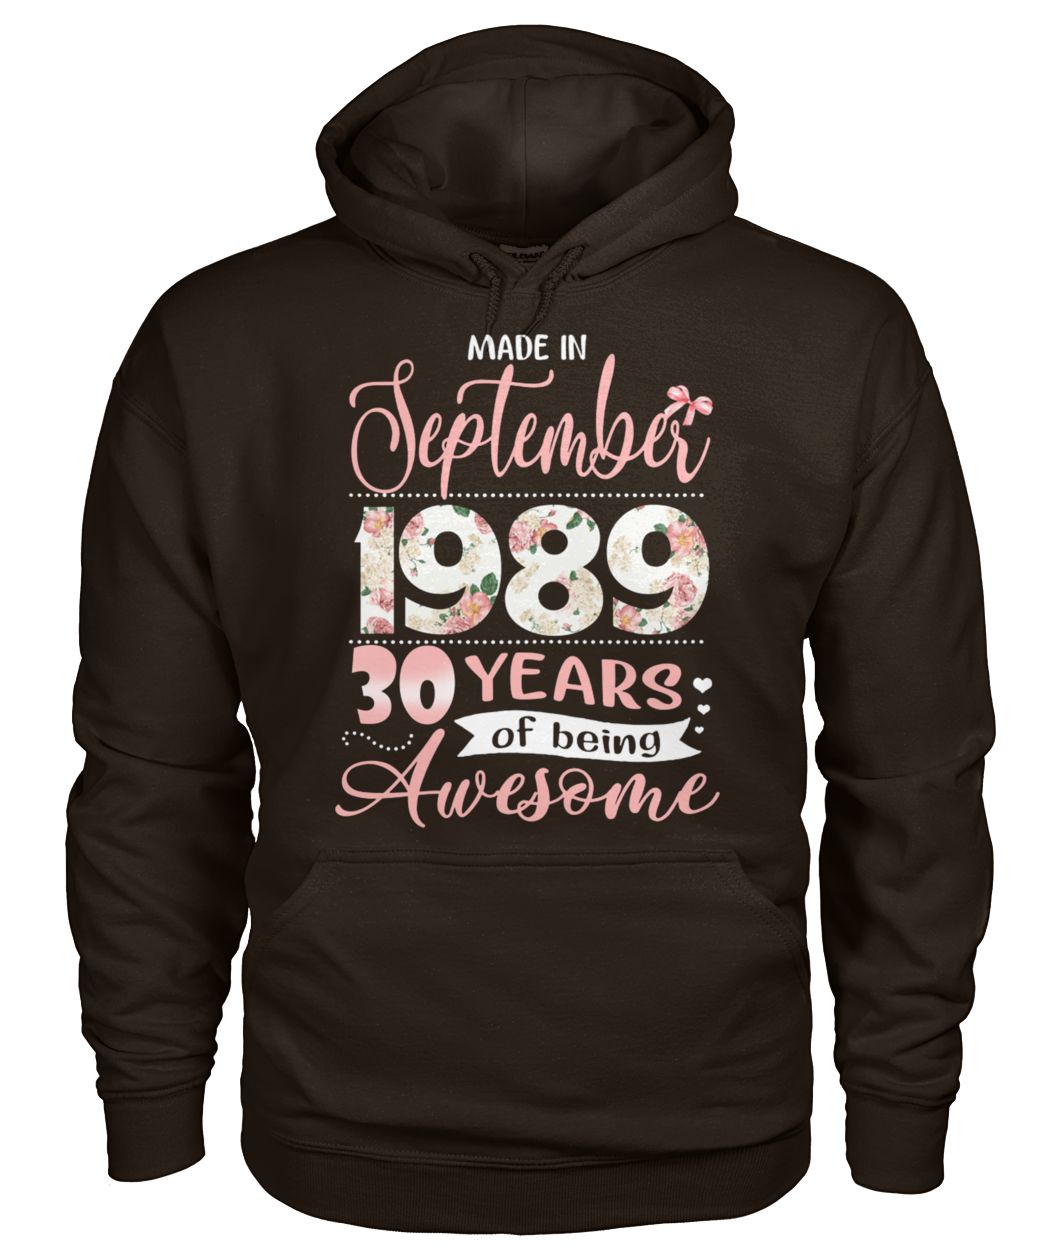 Floral made in september 1989 30 years of being awesome gildan hoodie